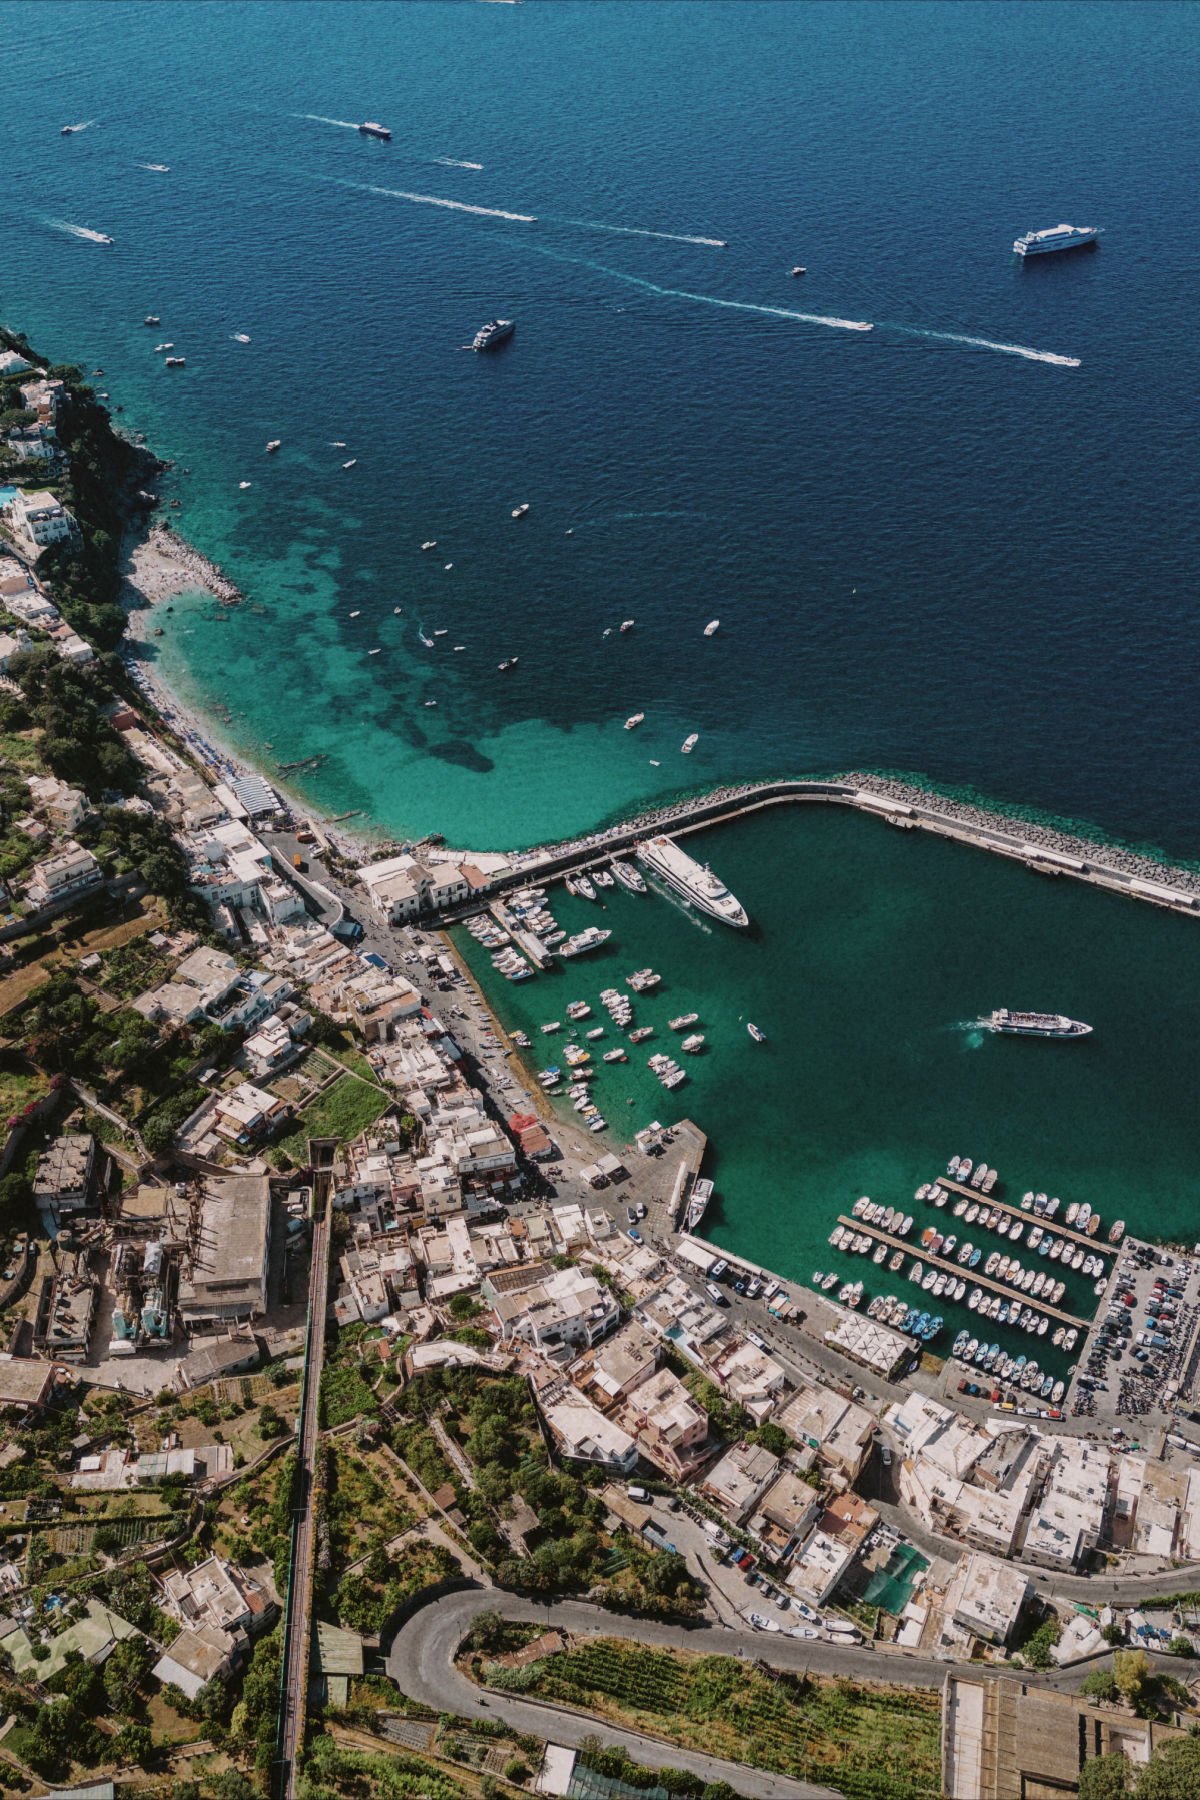 One of the best beaches in Capri are those in Marina Grande, directly next to the Capri port and harbor